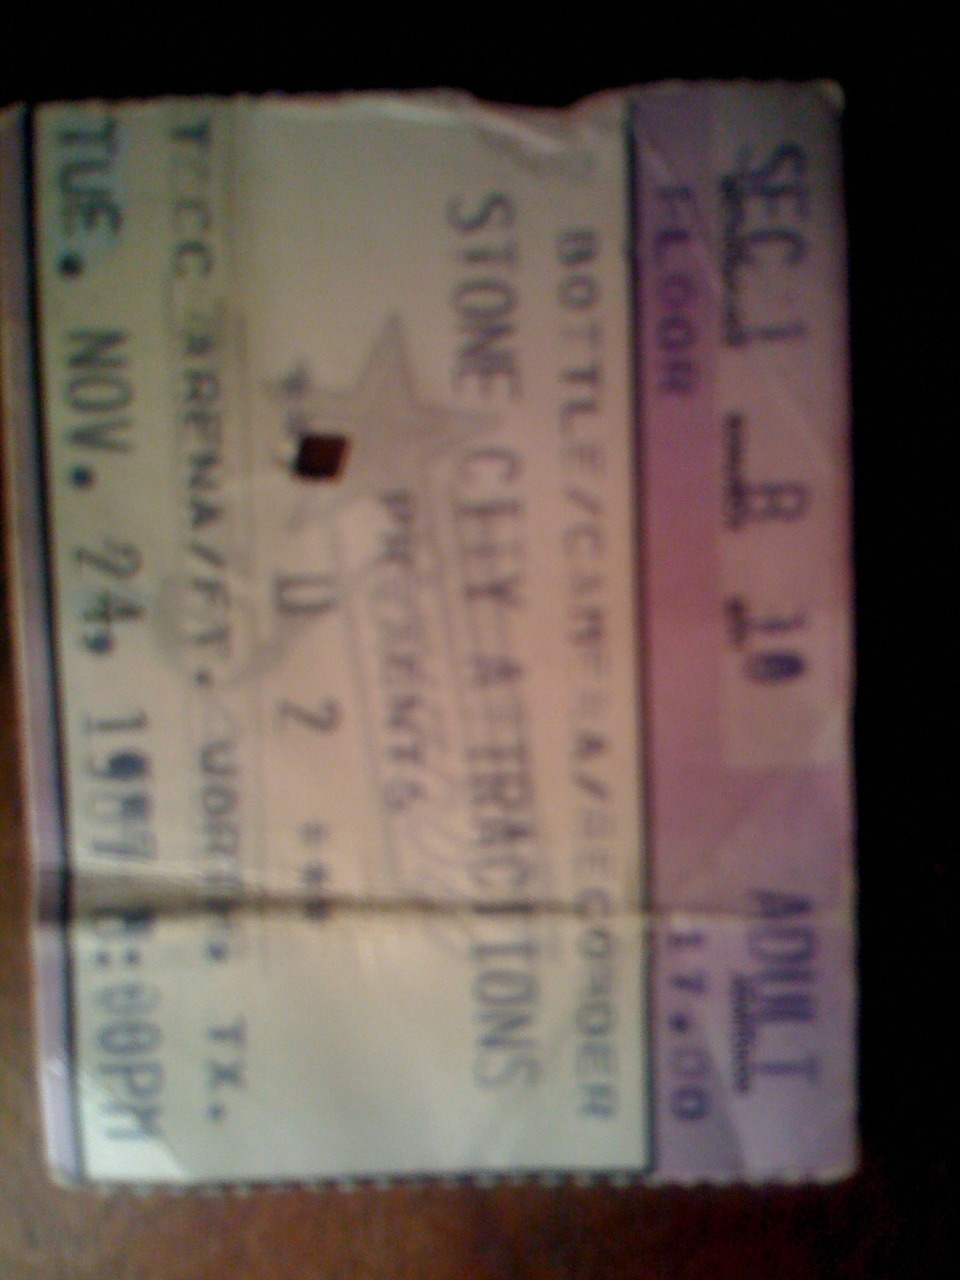 This mediocre photo shows the forged ticket stub (look closely at the Liquid Paper + pencil “TUE.” and 4 in “24”) that got Jeff and me back down to the floor for the second Fort Worth performance, which eventually allowed Jeff to get on stage with...